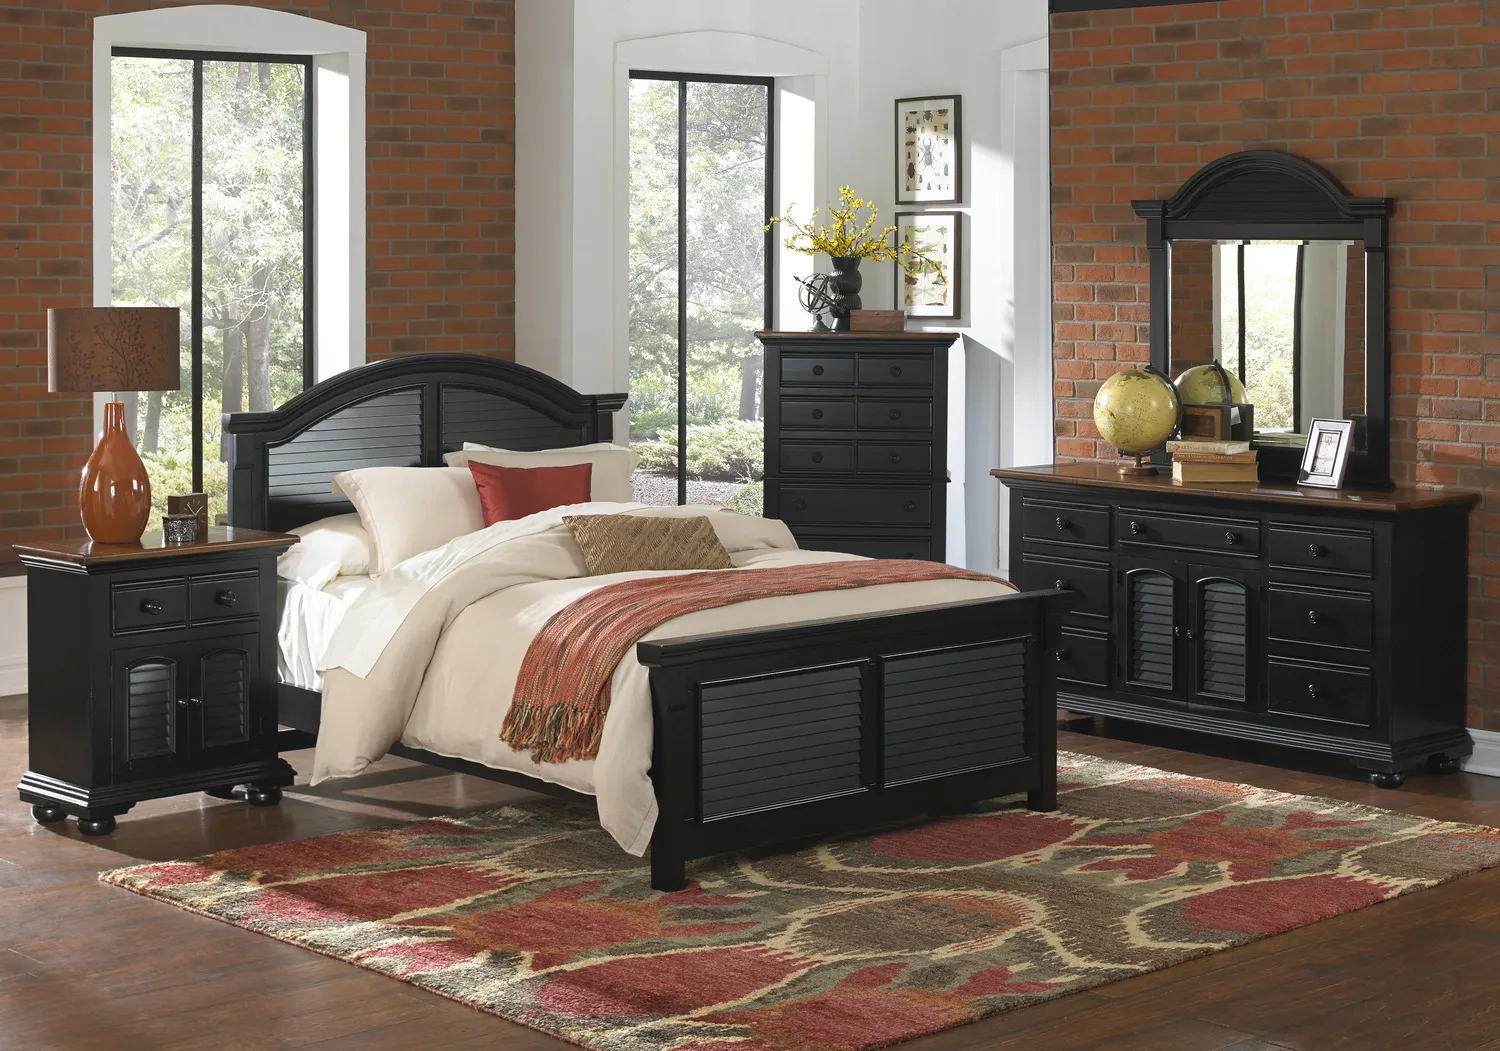 distressed french style bedroom furniture